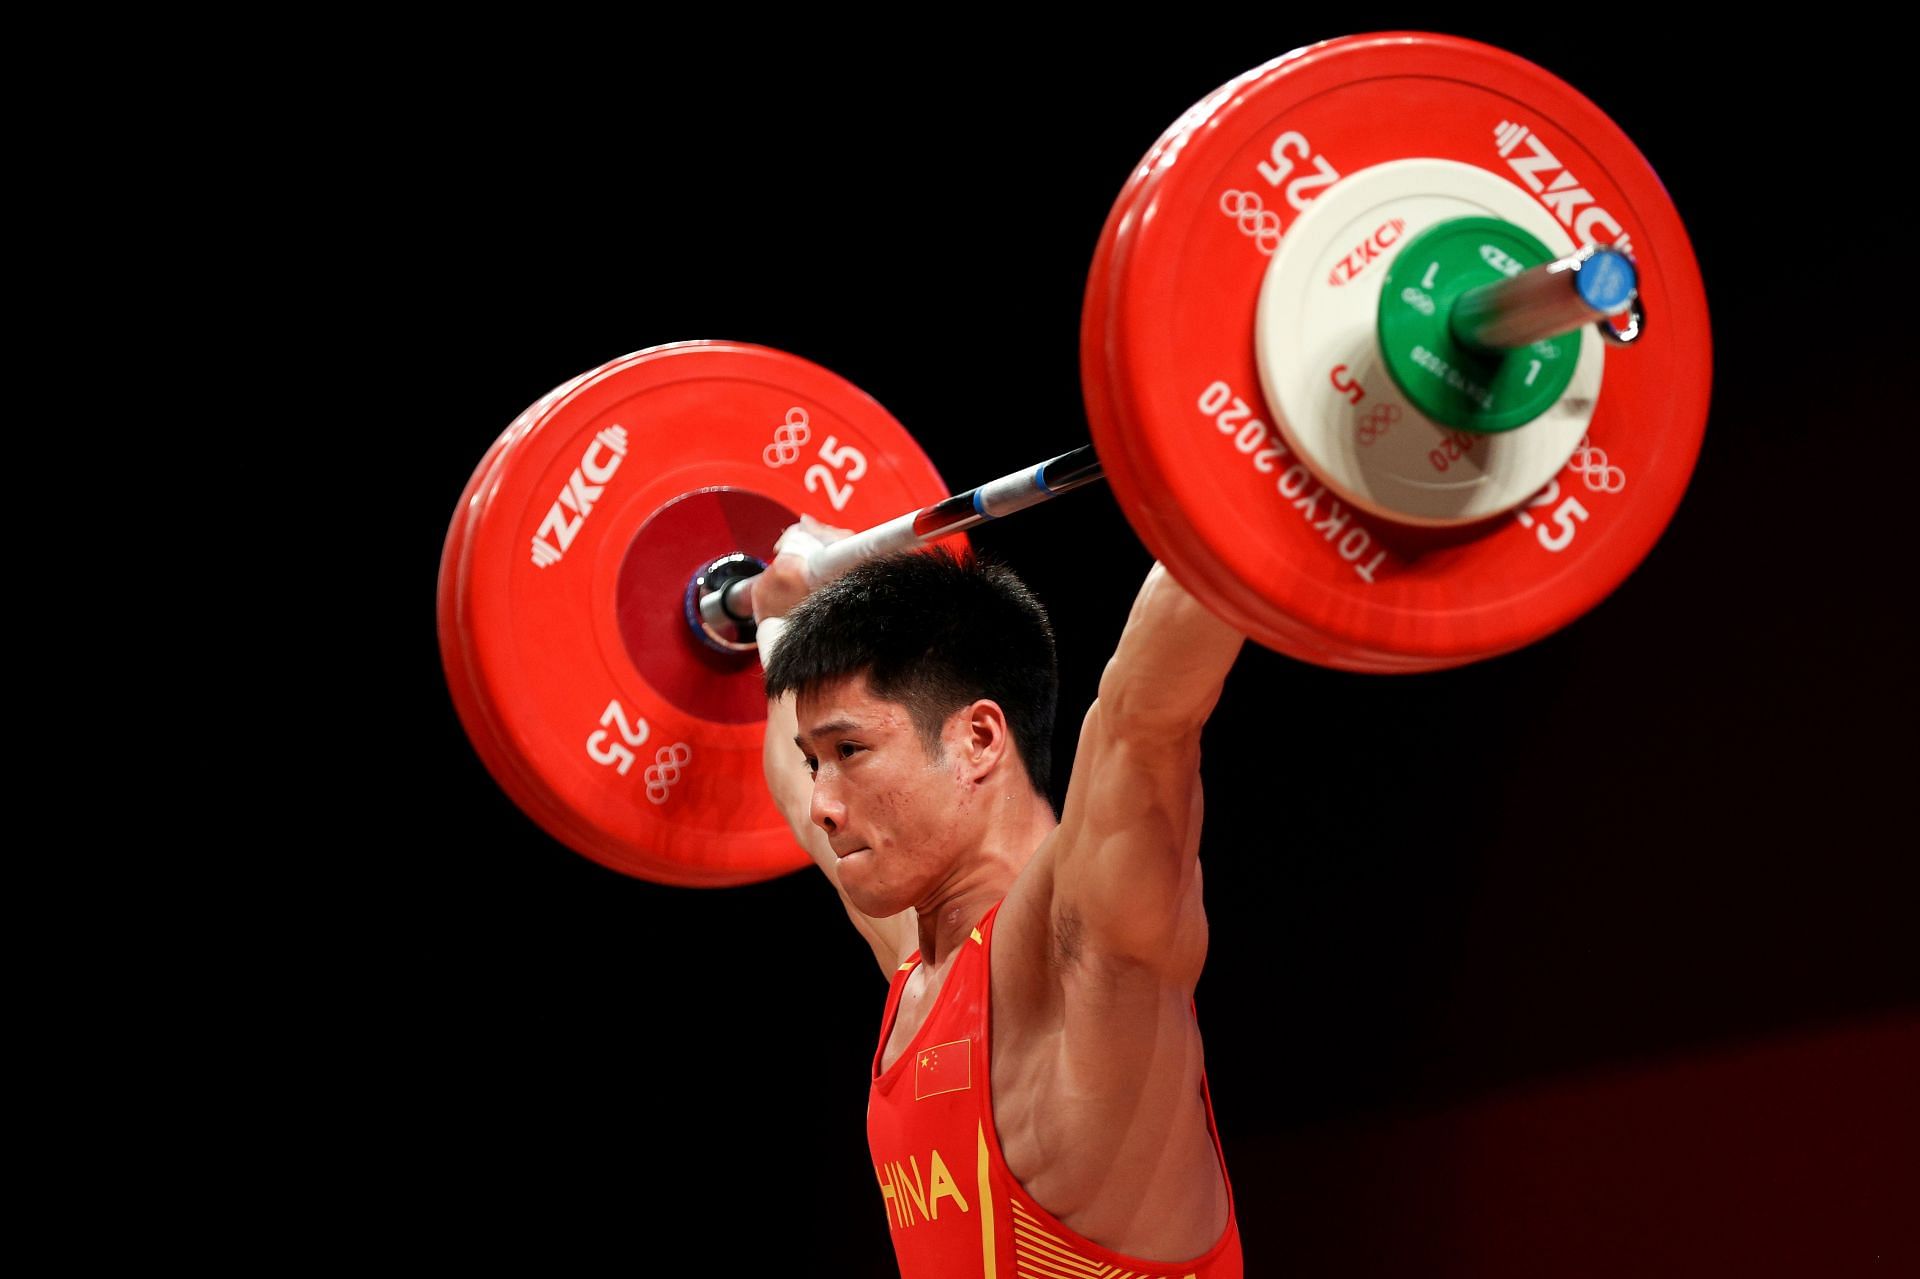 2022 World Weightlifting Championships Dates, schedule, how to watch and more